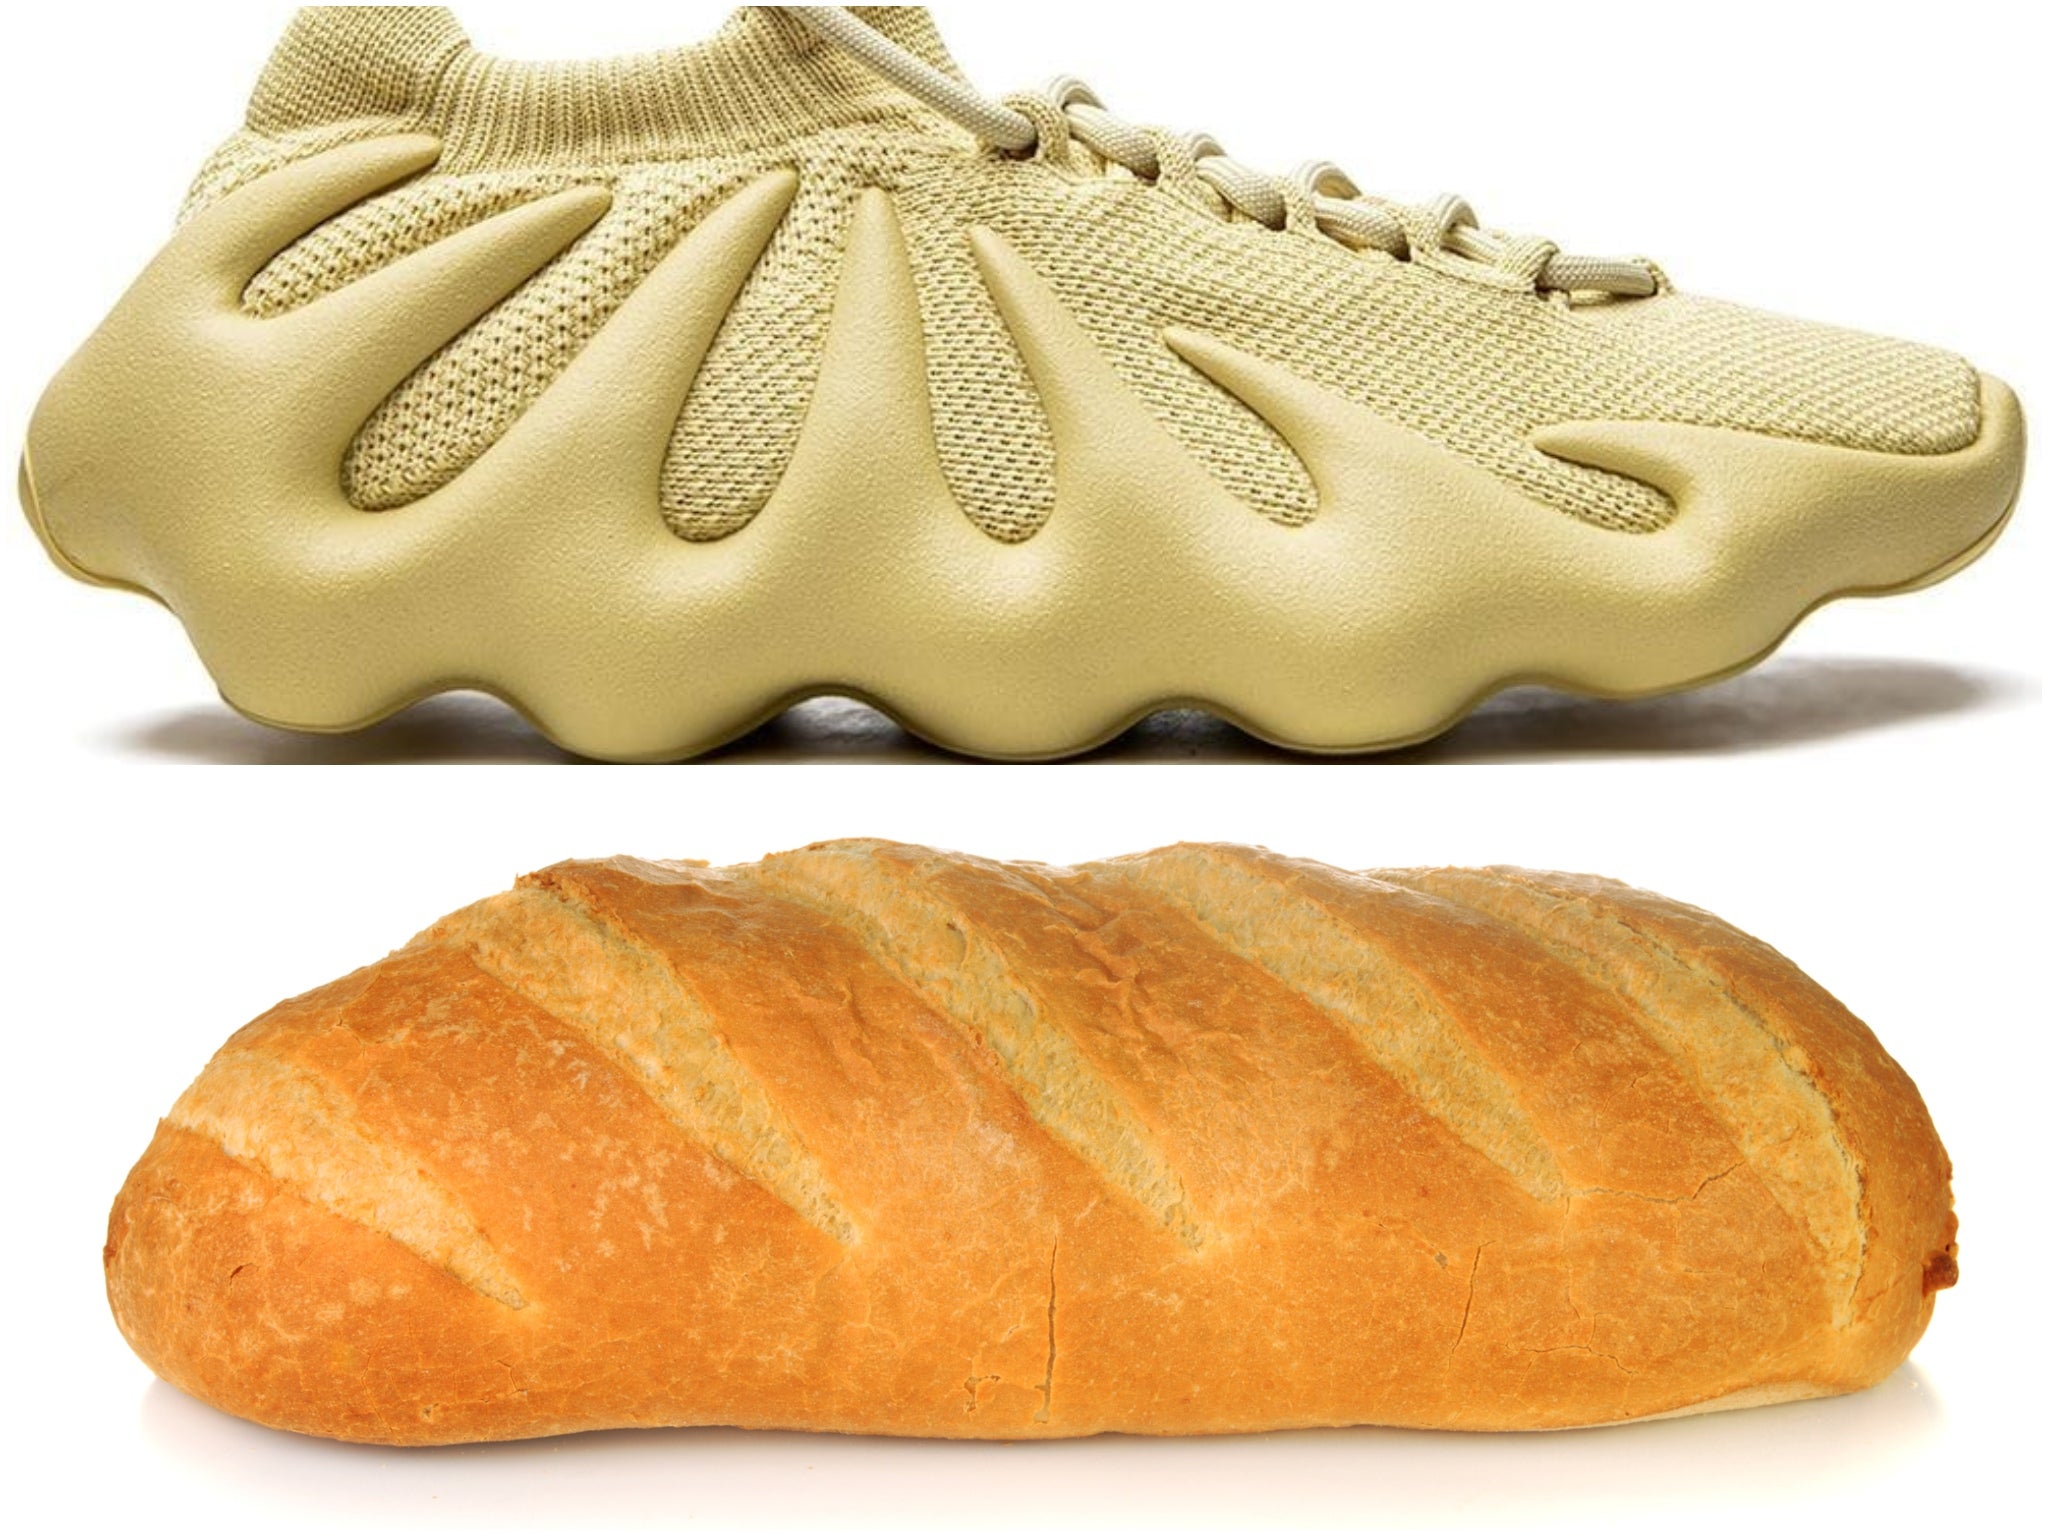 Fans compared the Yeezy’s 450 Sulfur trainers to bread